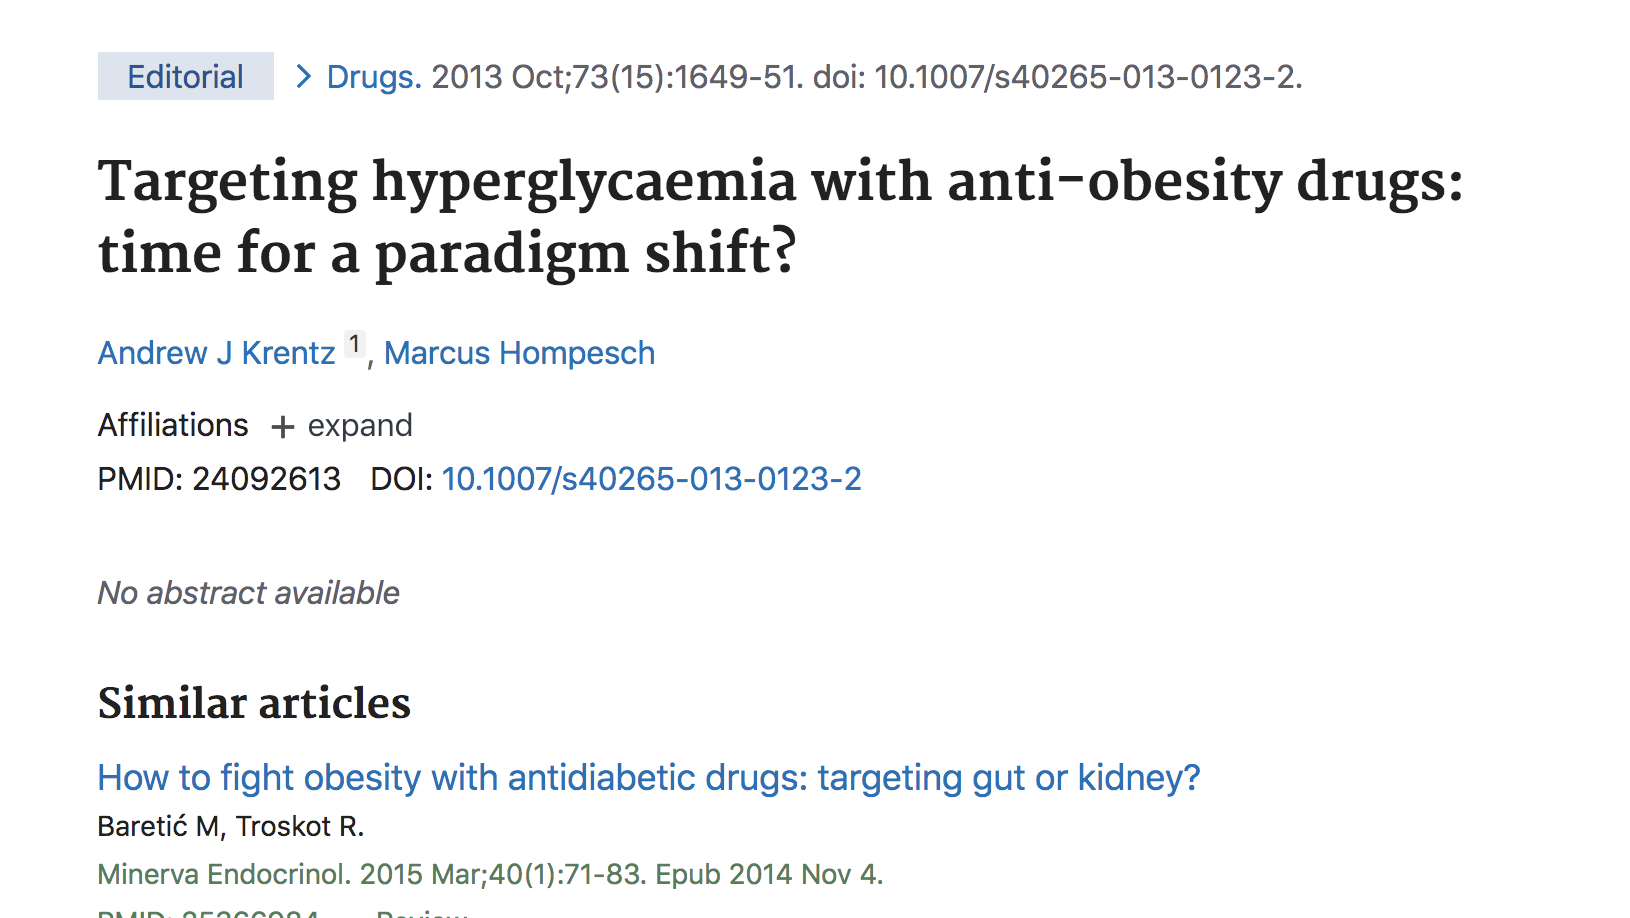 Targeting hyperglycaemia with anti-obesity drugs: time for a paradigm shift thumbnail